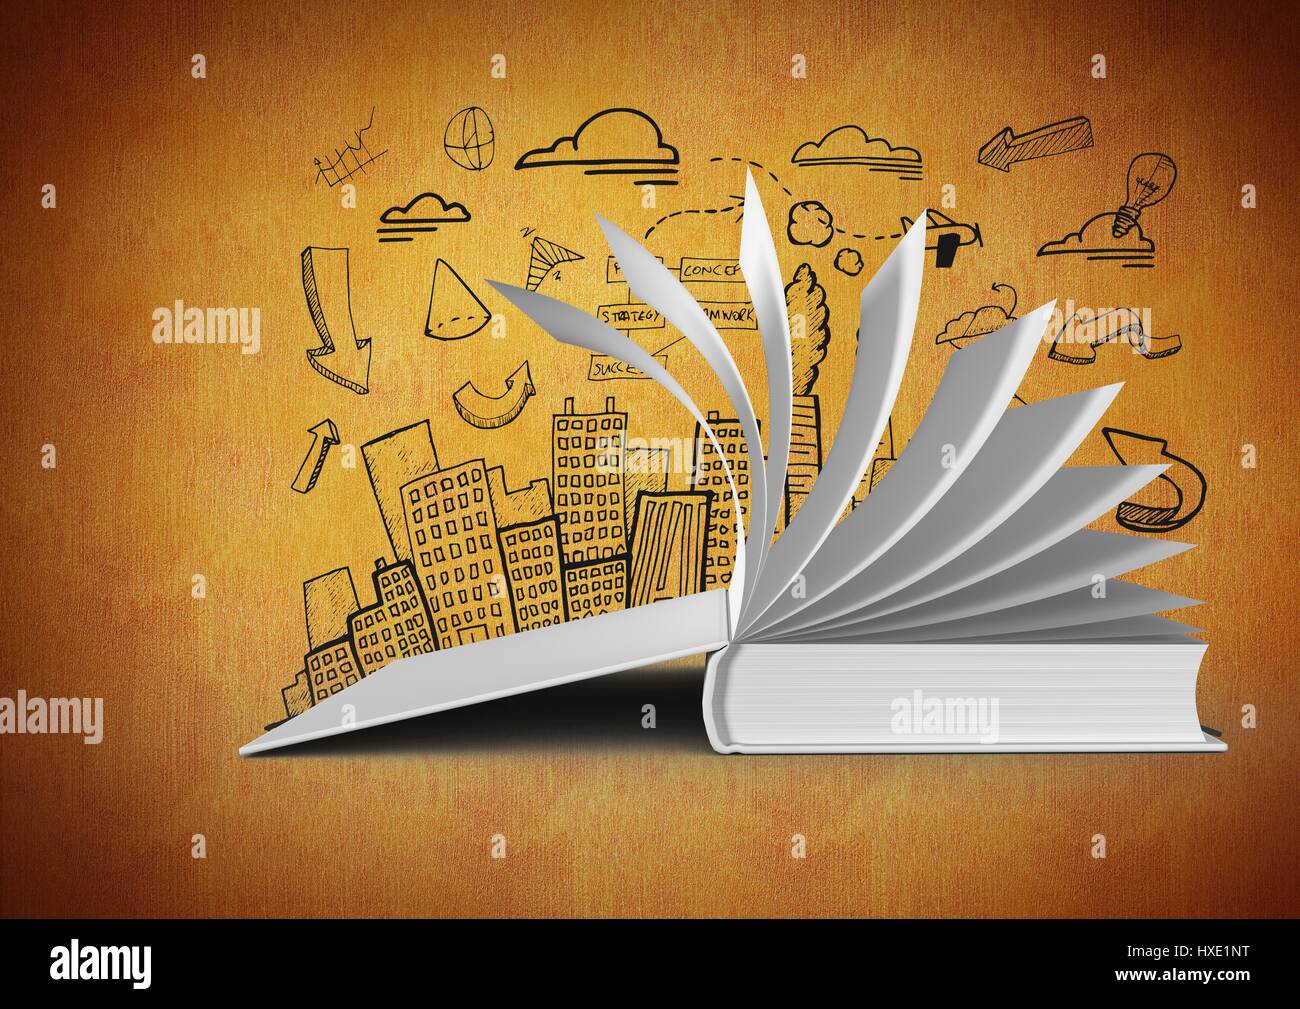 Digital composite of 3D Book open turning pages against orange background  with city illustration drawings Stock Photo - Alamy